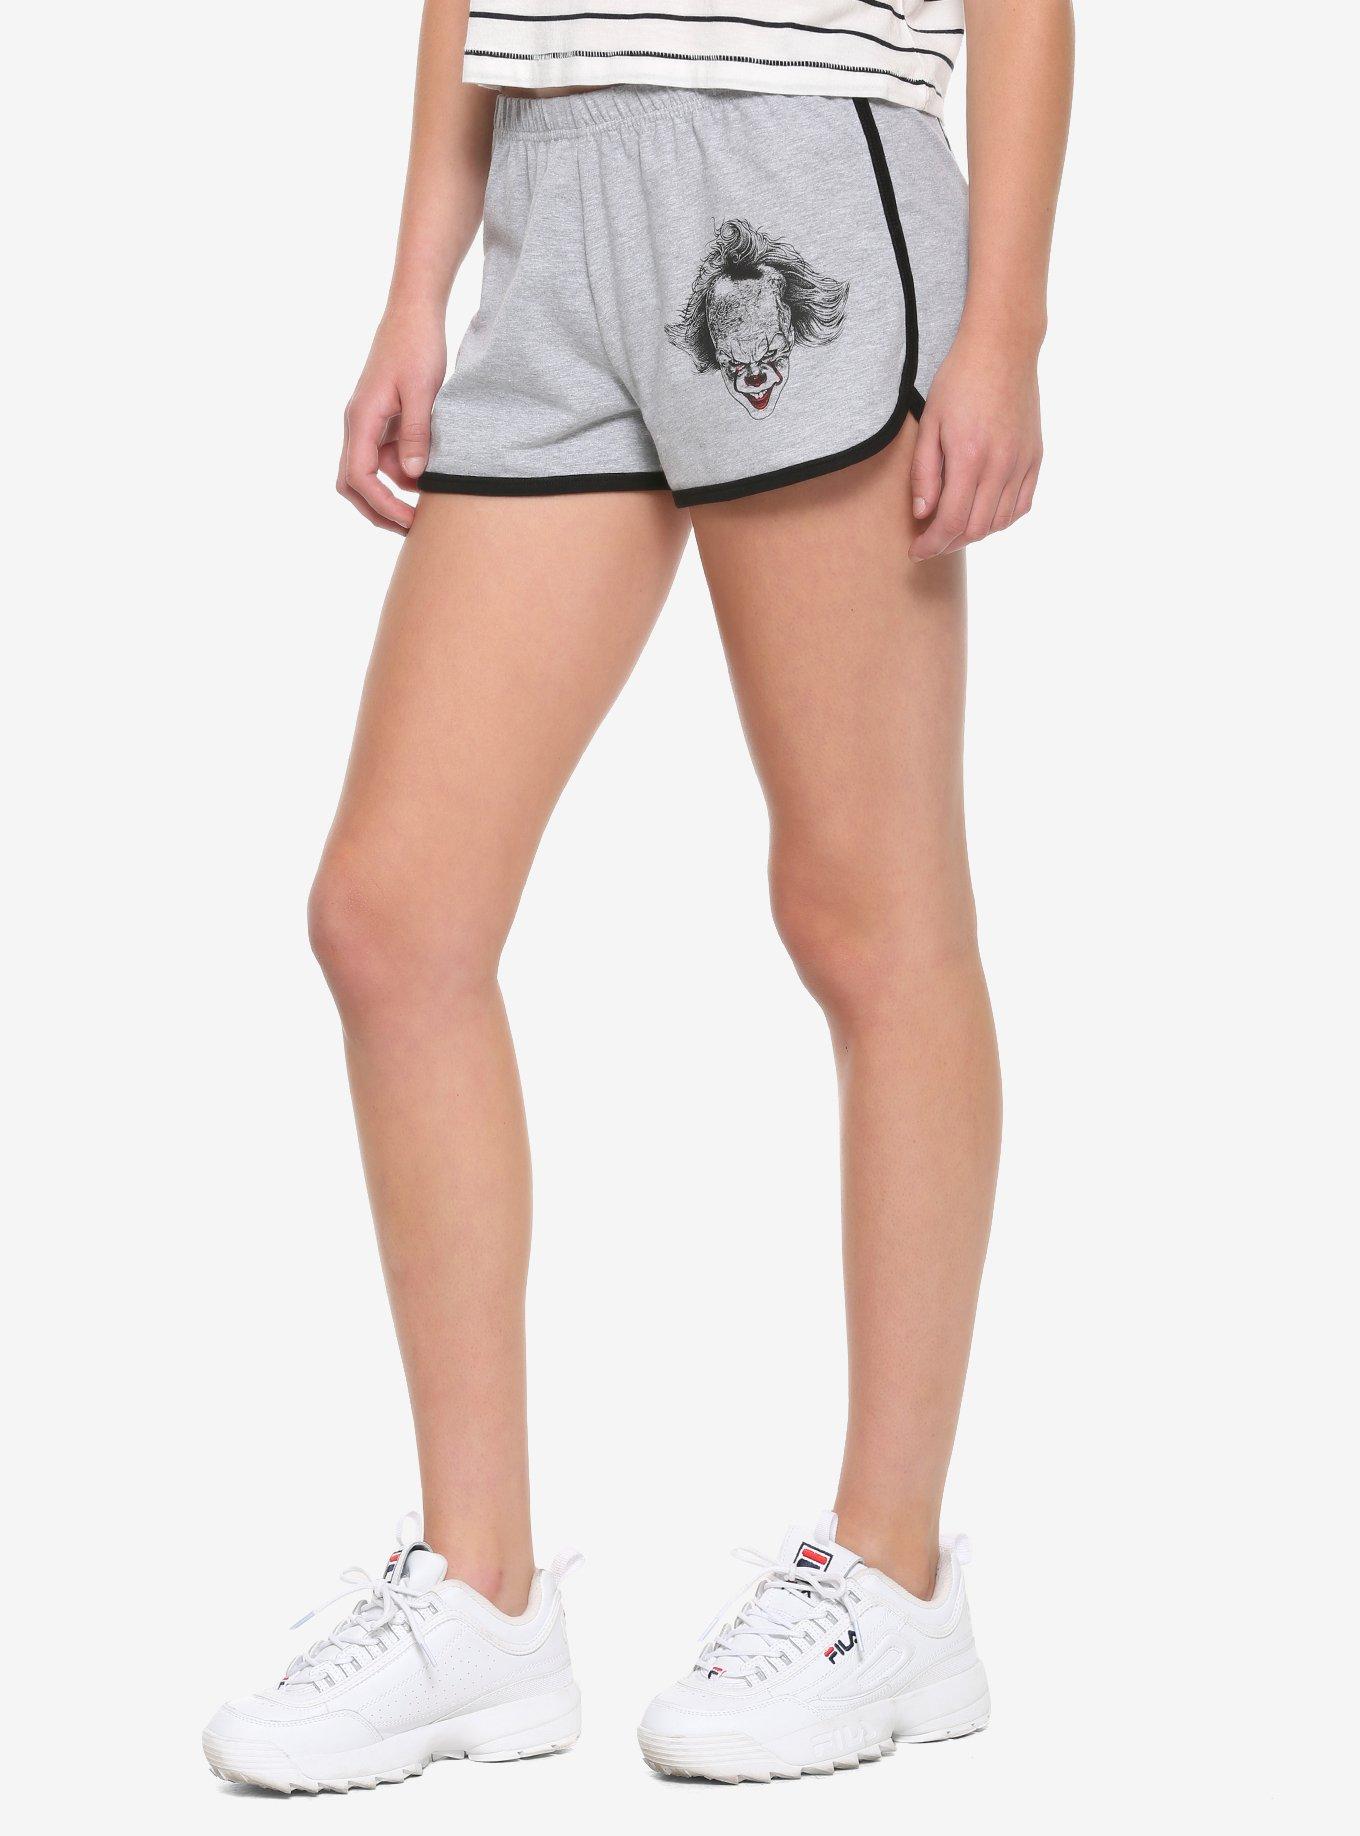 IT Pennywise Sketch Girls Soft Shorts, GREY, hi-res